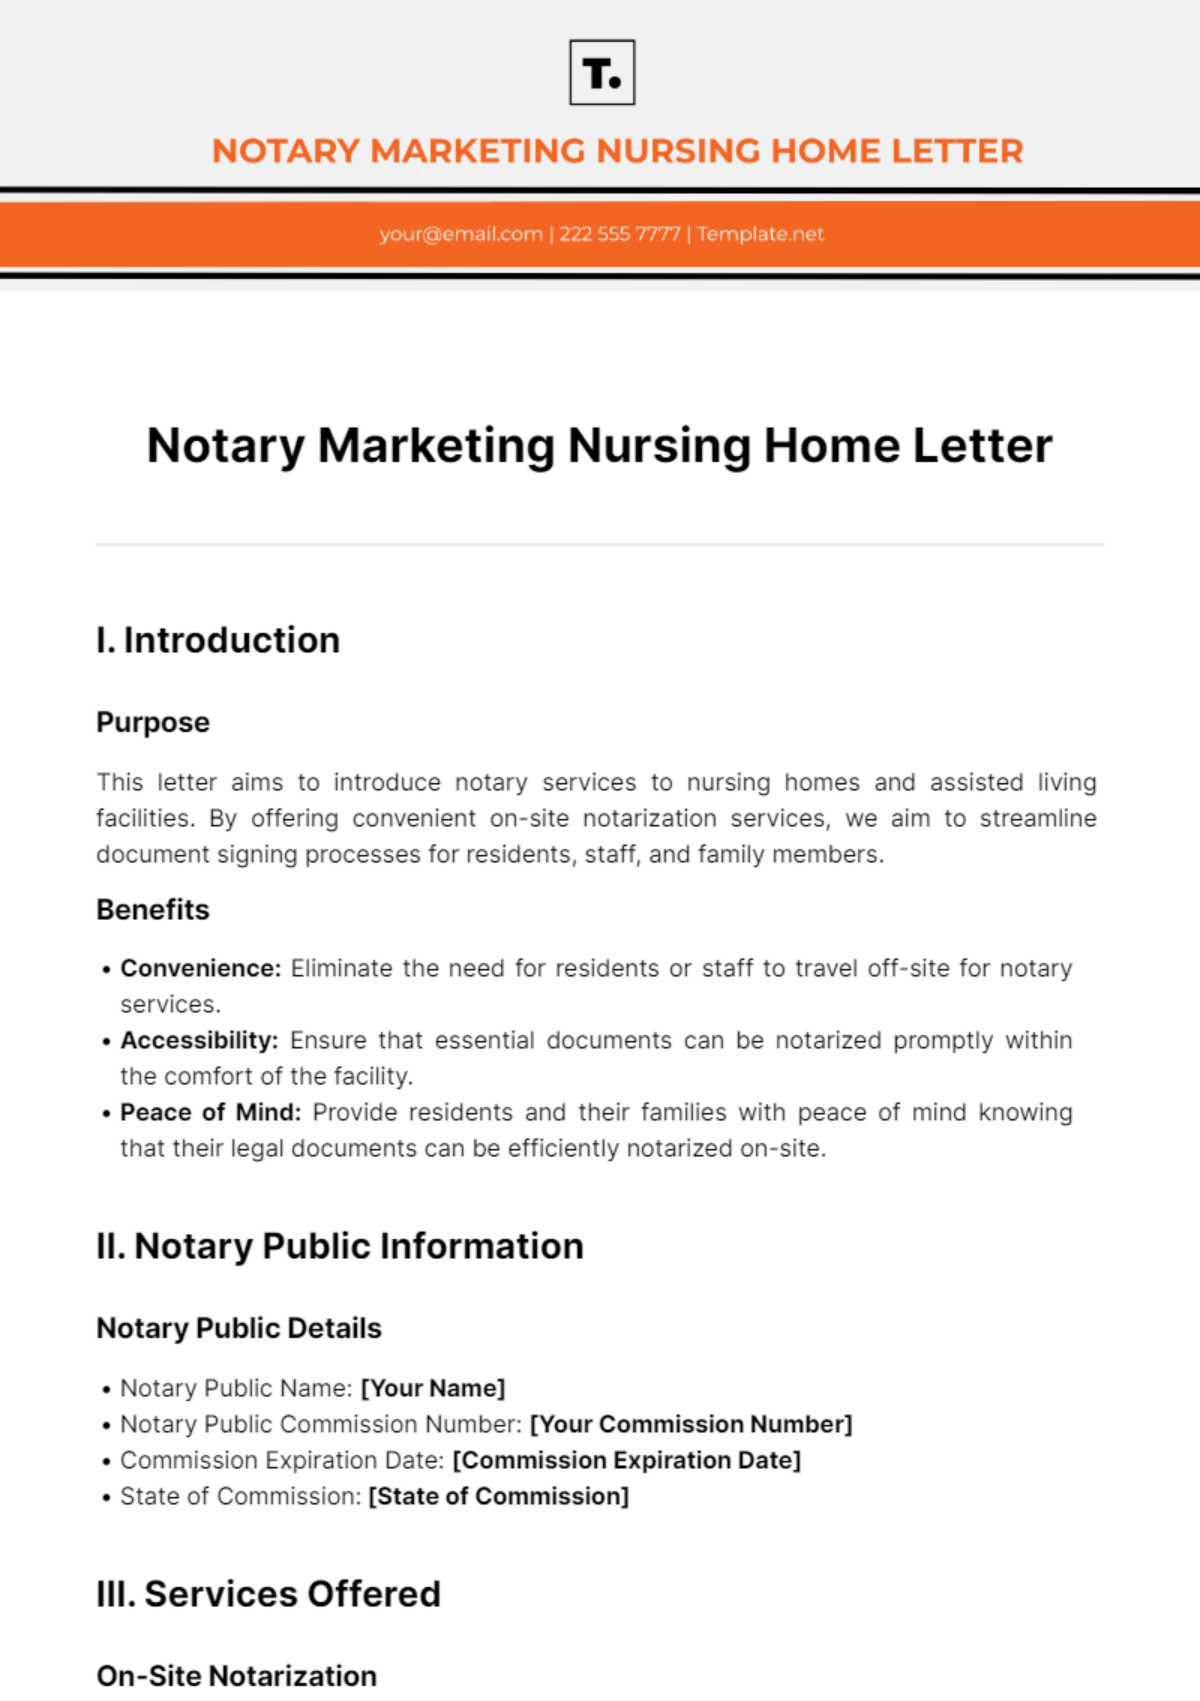 Free Notary Marketing Nursing Home Letter Template